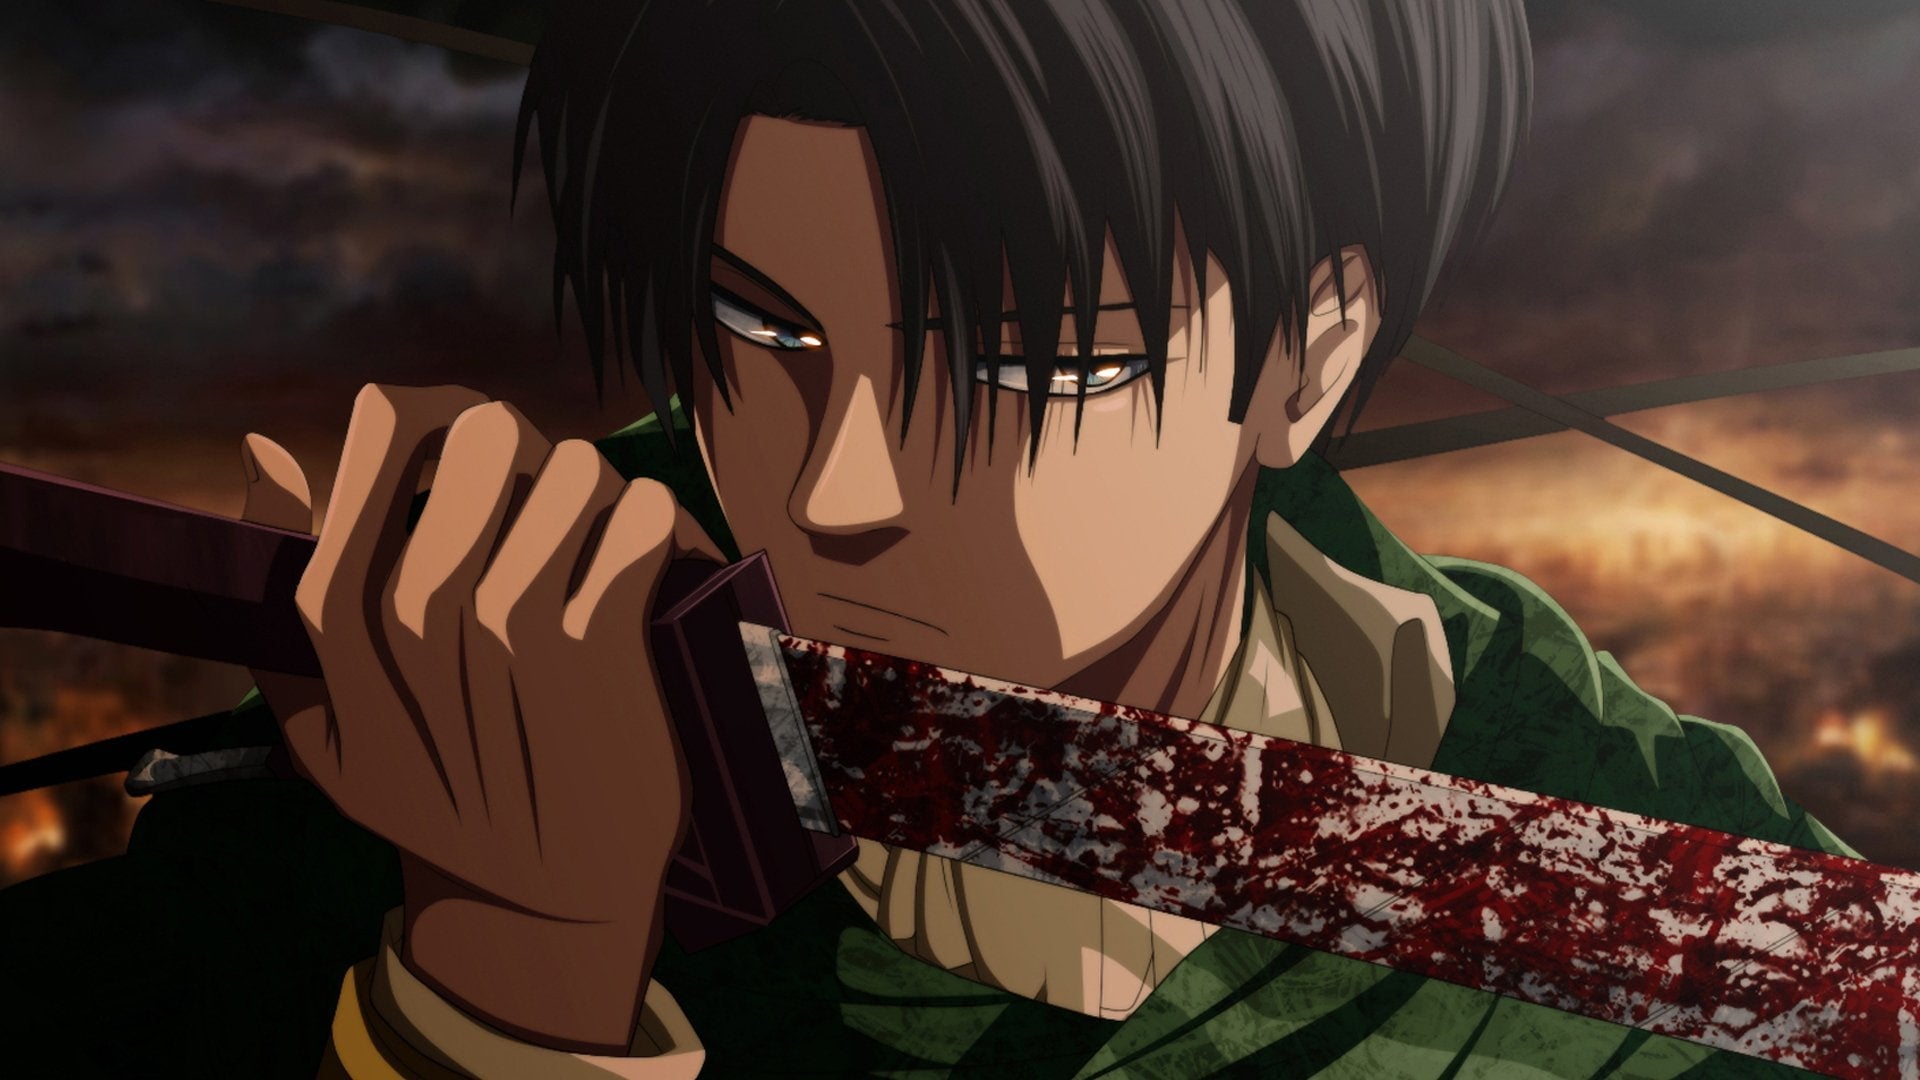 Don't Miss Out on the Exciting Conclusion: Attack on Titan Season 4 Part 3 Full Episode Release!